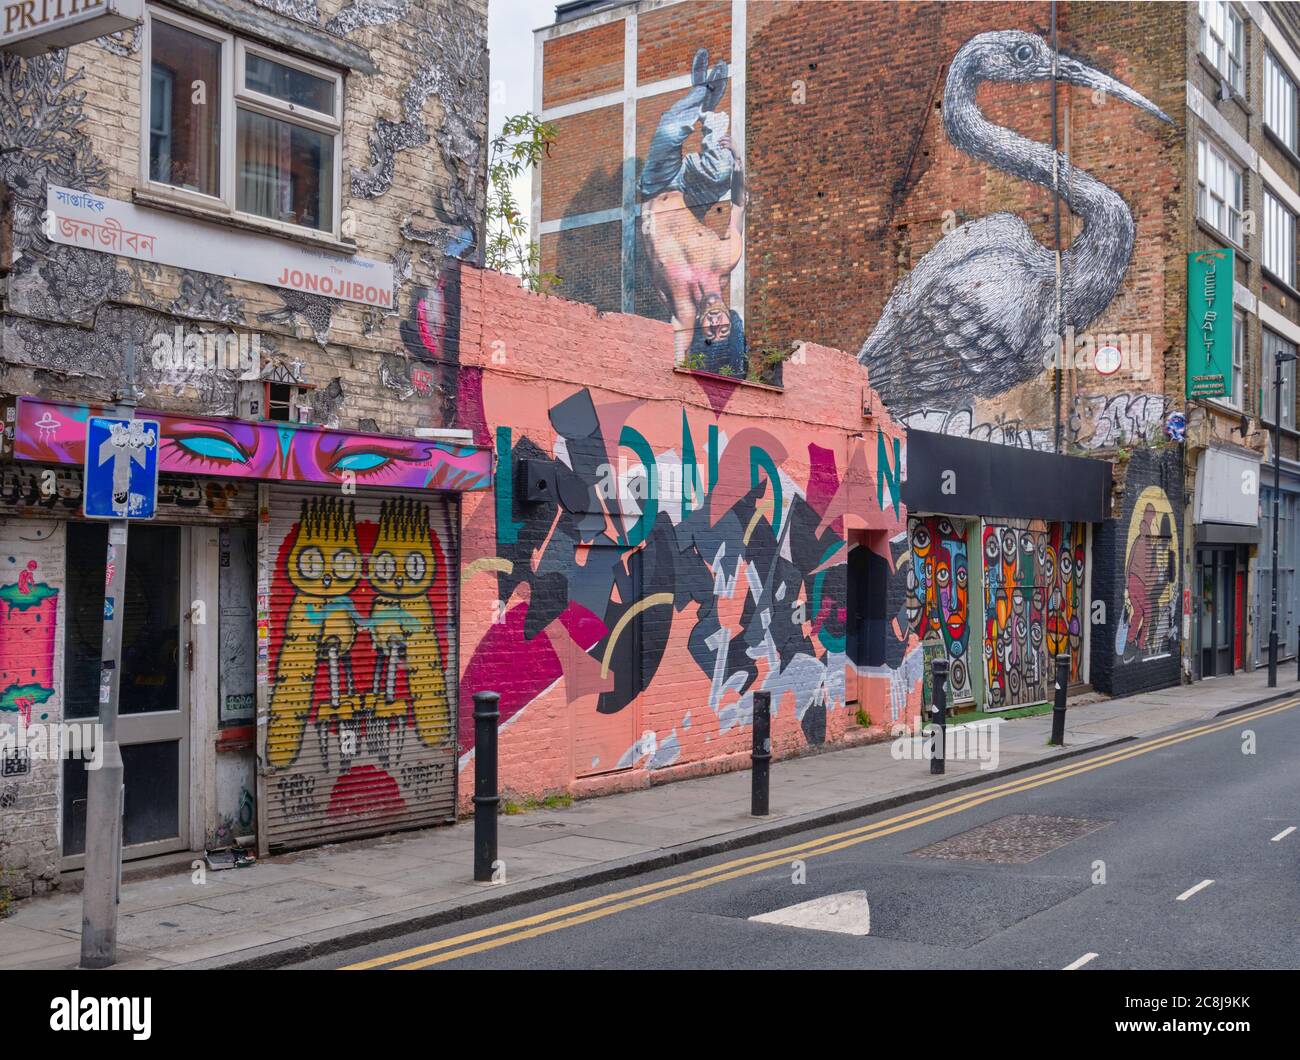 Brick Lane, at Shorditch in the Borough of Tower Hamlets, east London, UK. Stock Photo